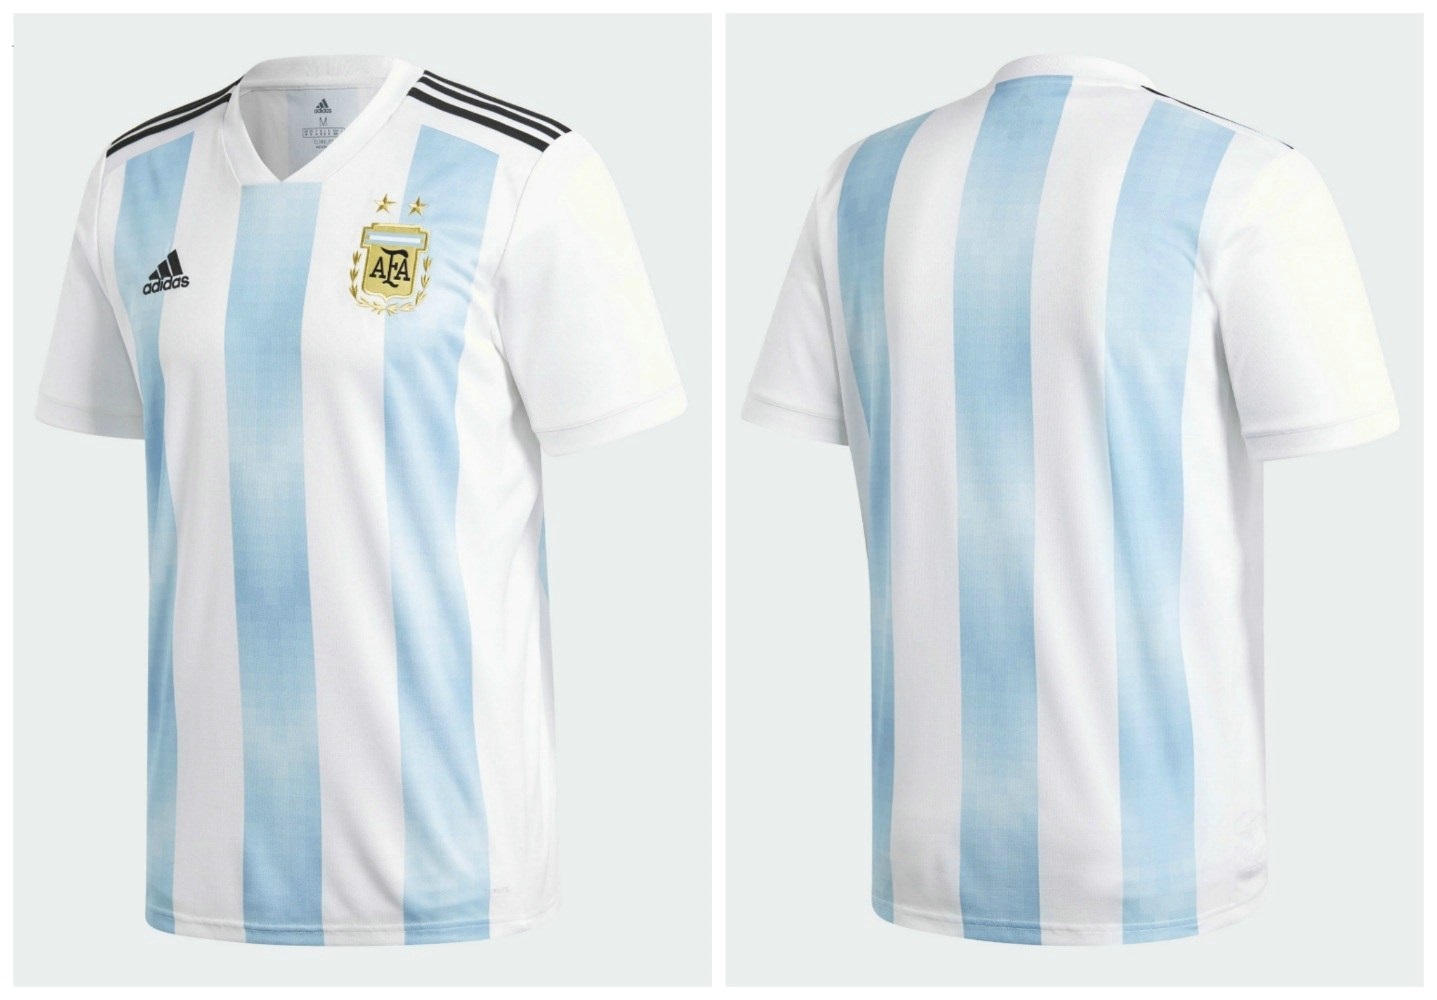 Argentina 2018 FIFA World Cup Home kit official